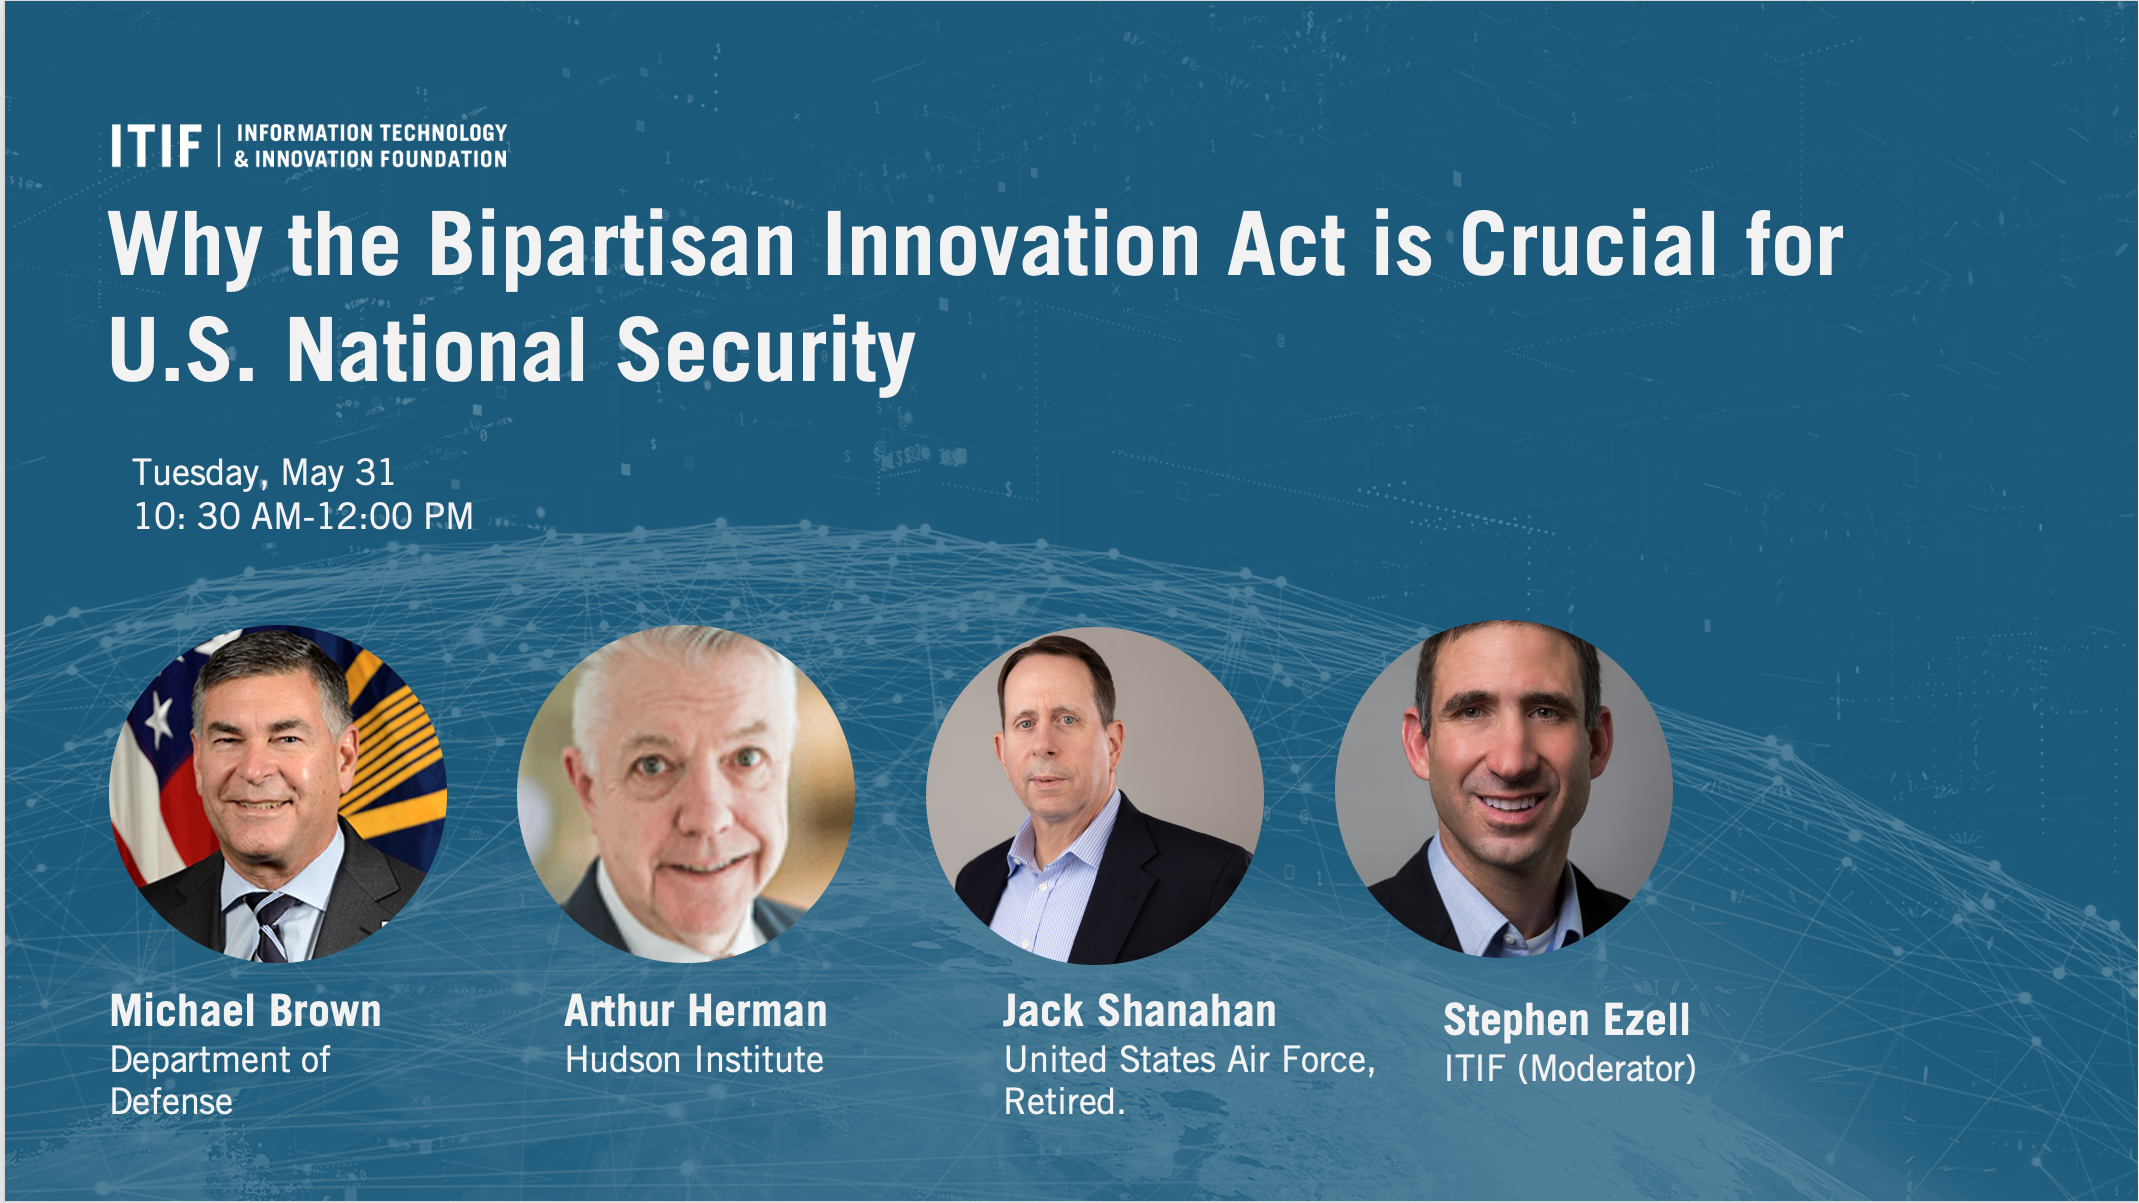 Why the Bipartisan Innovation Act is Crucial for U.S. National Security